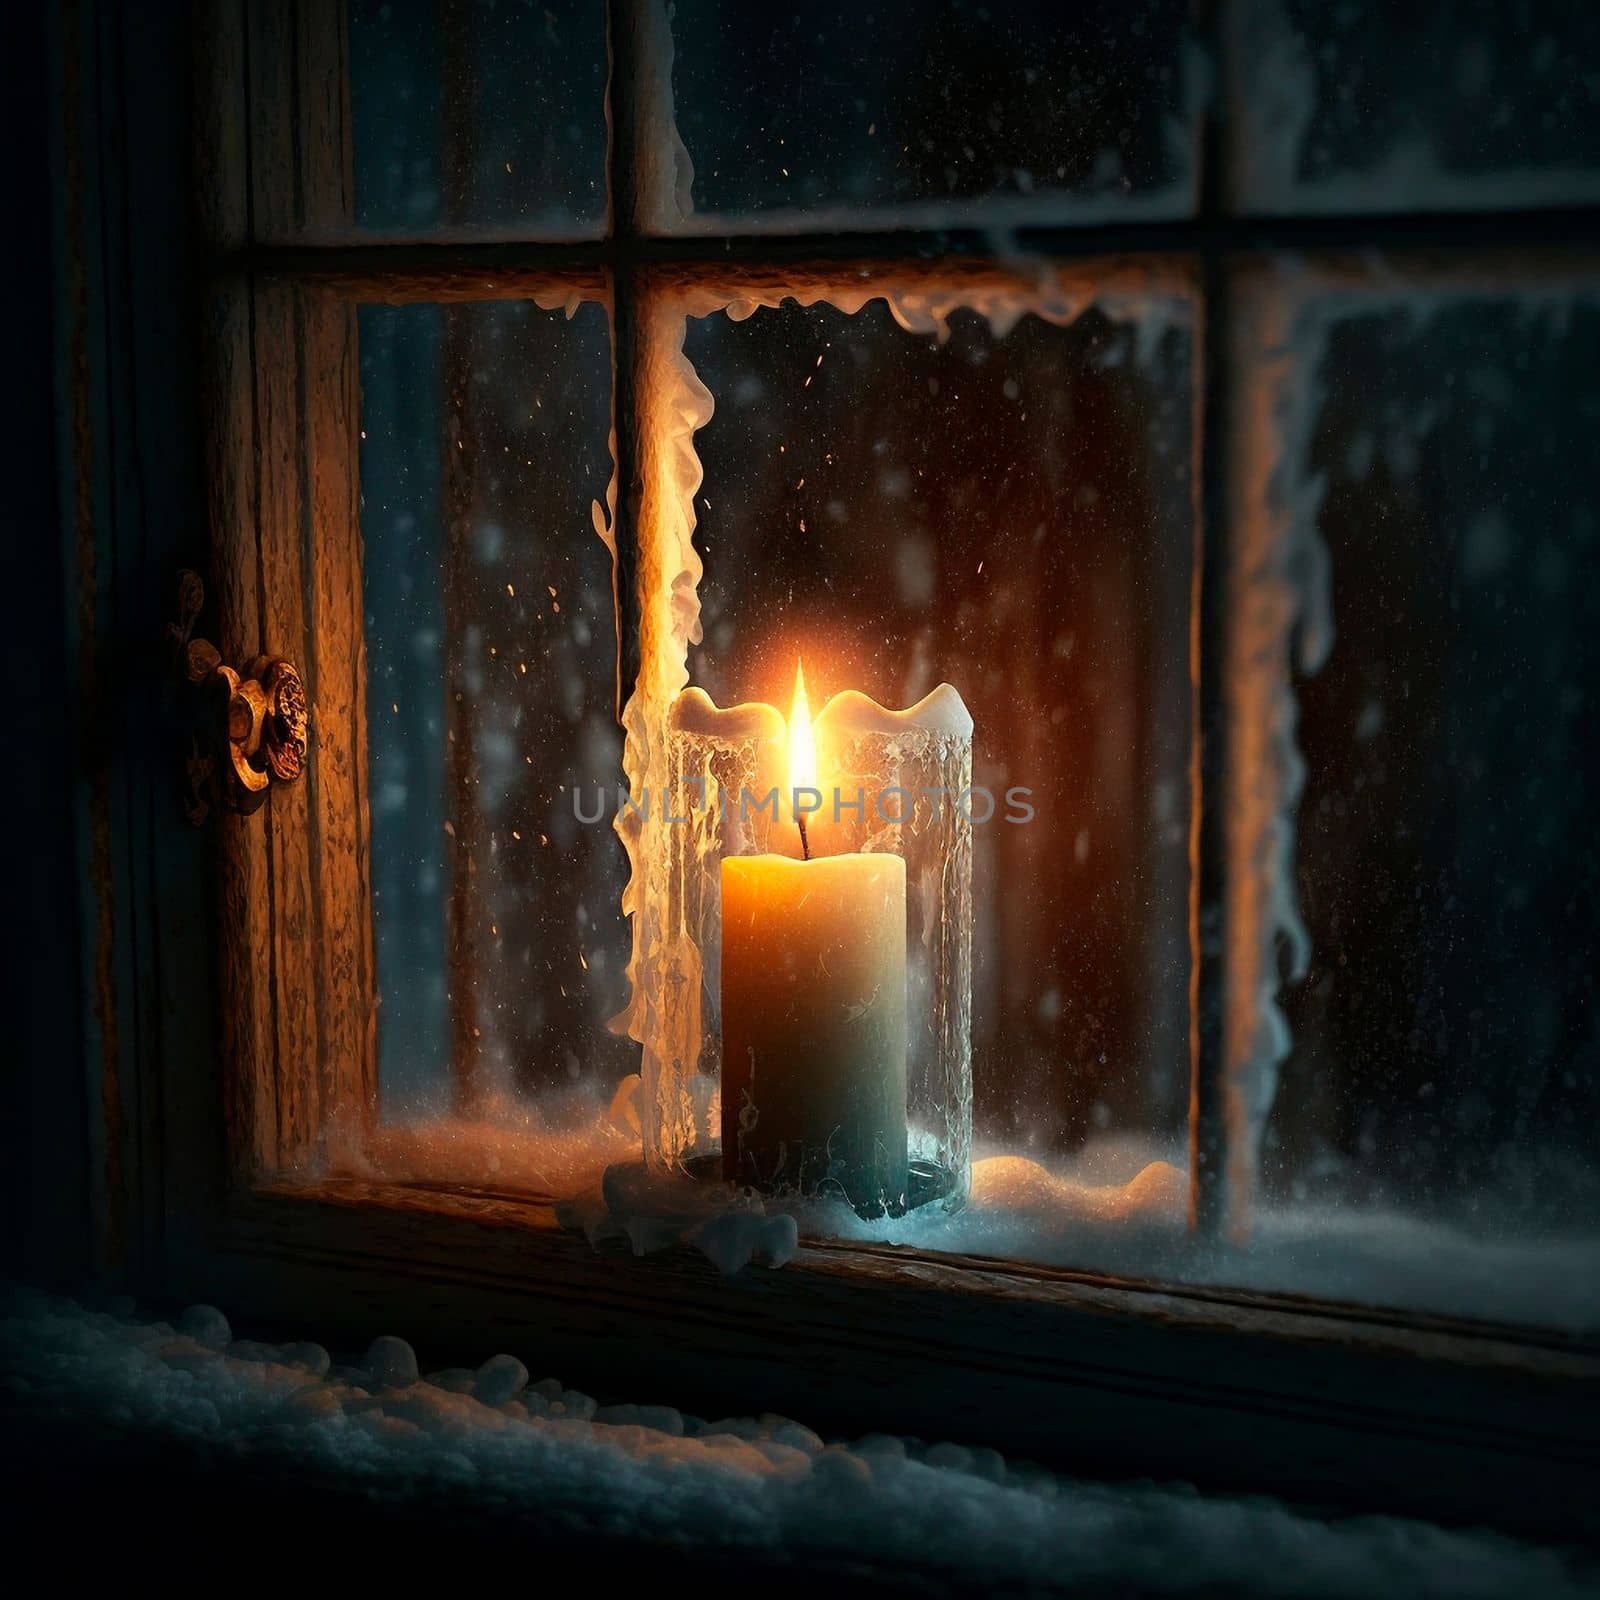 A candle in a glass by a frozen window. High quality illustration